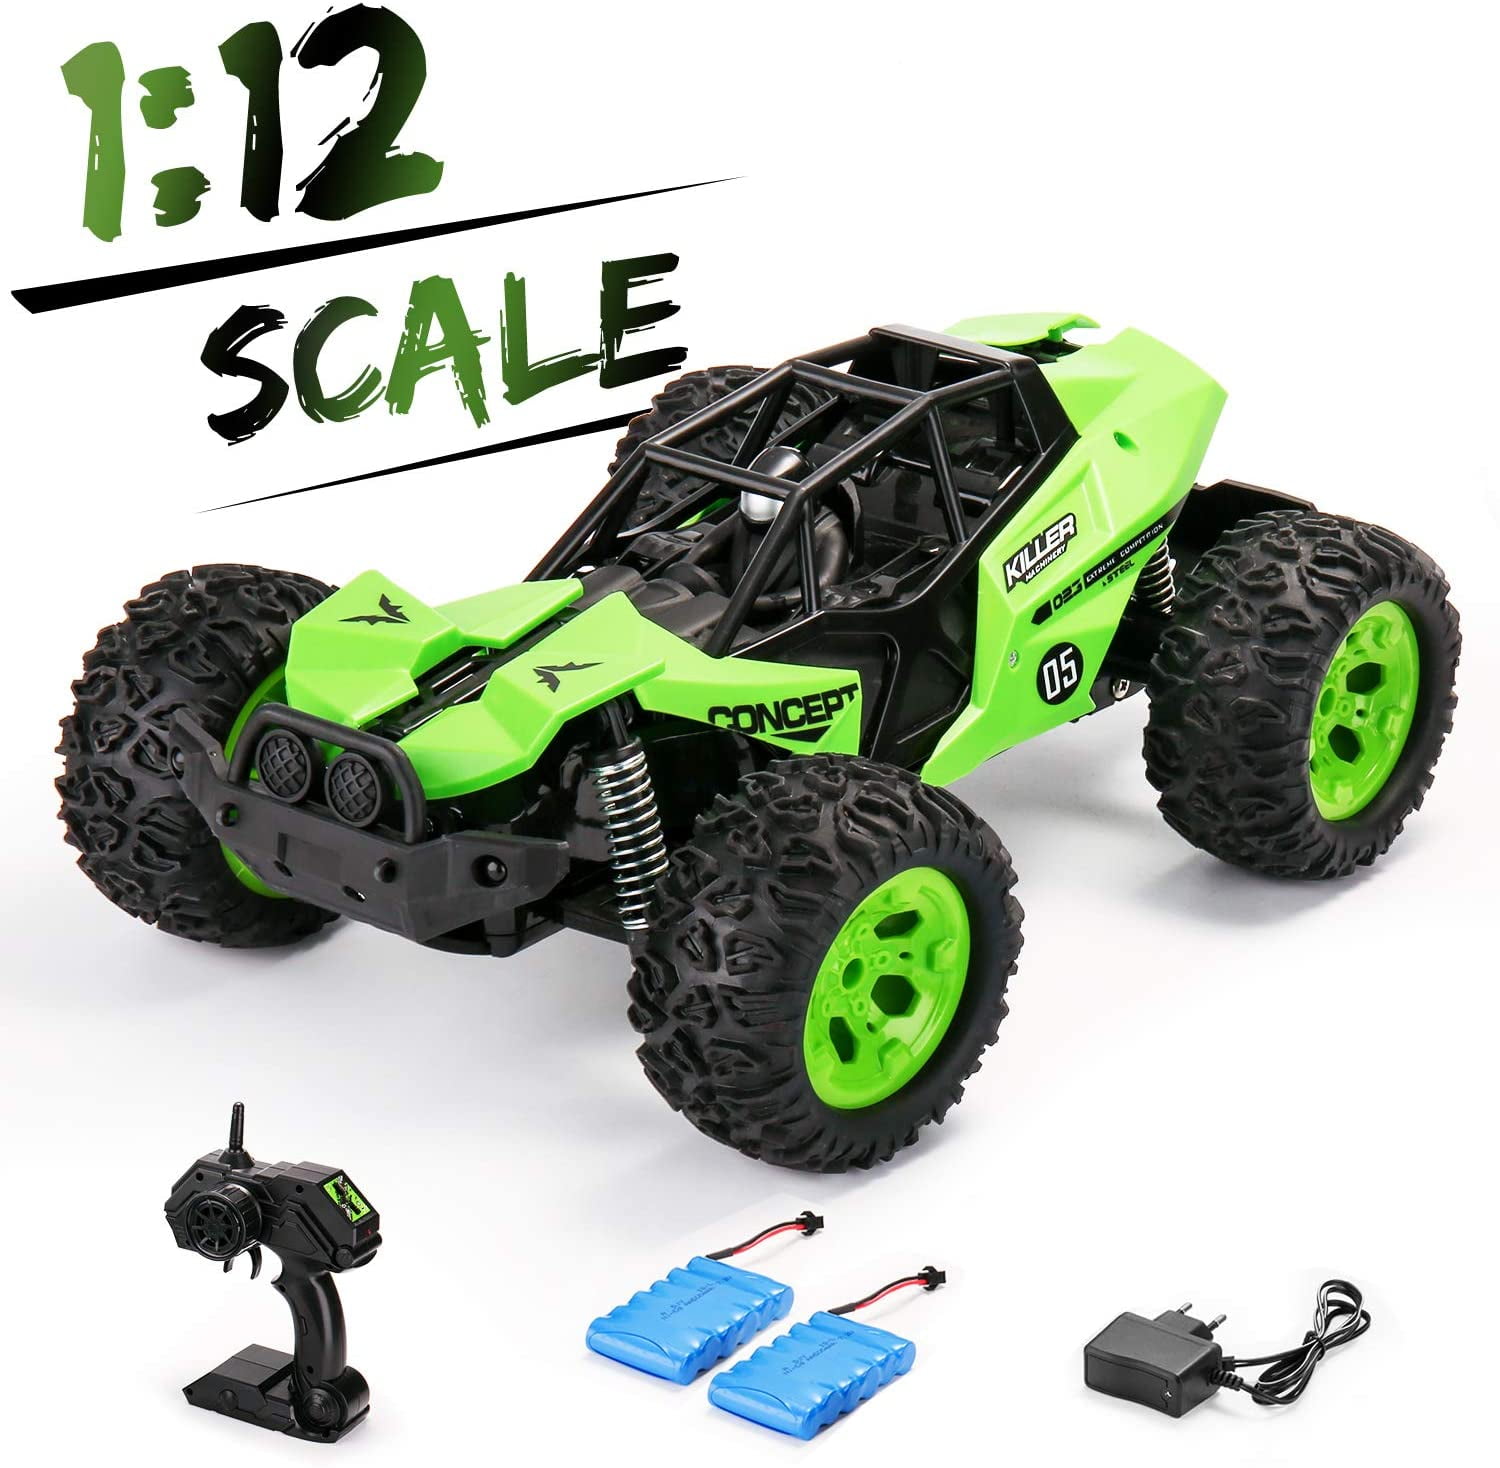 Grass Green Remote Control Toy Green 